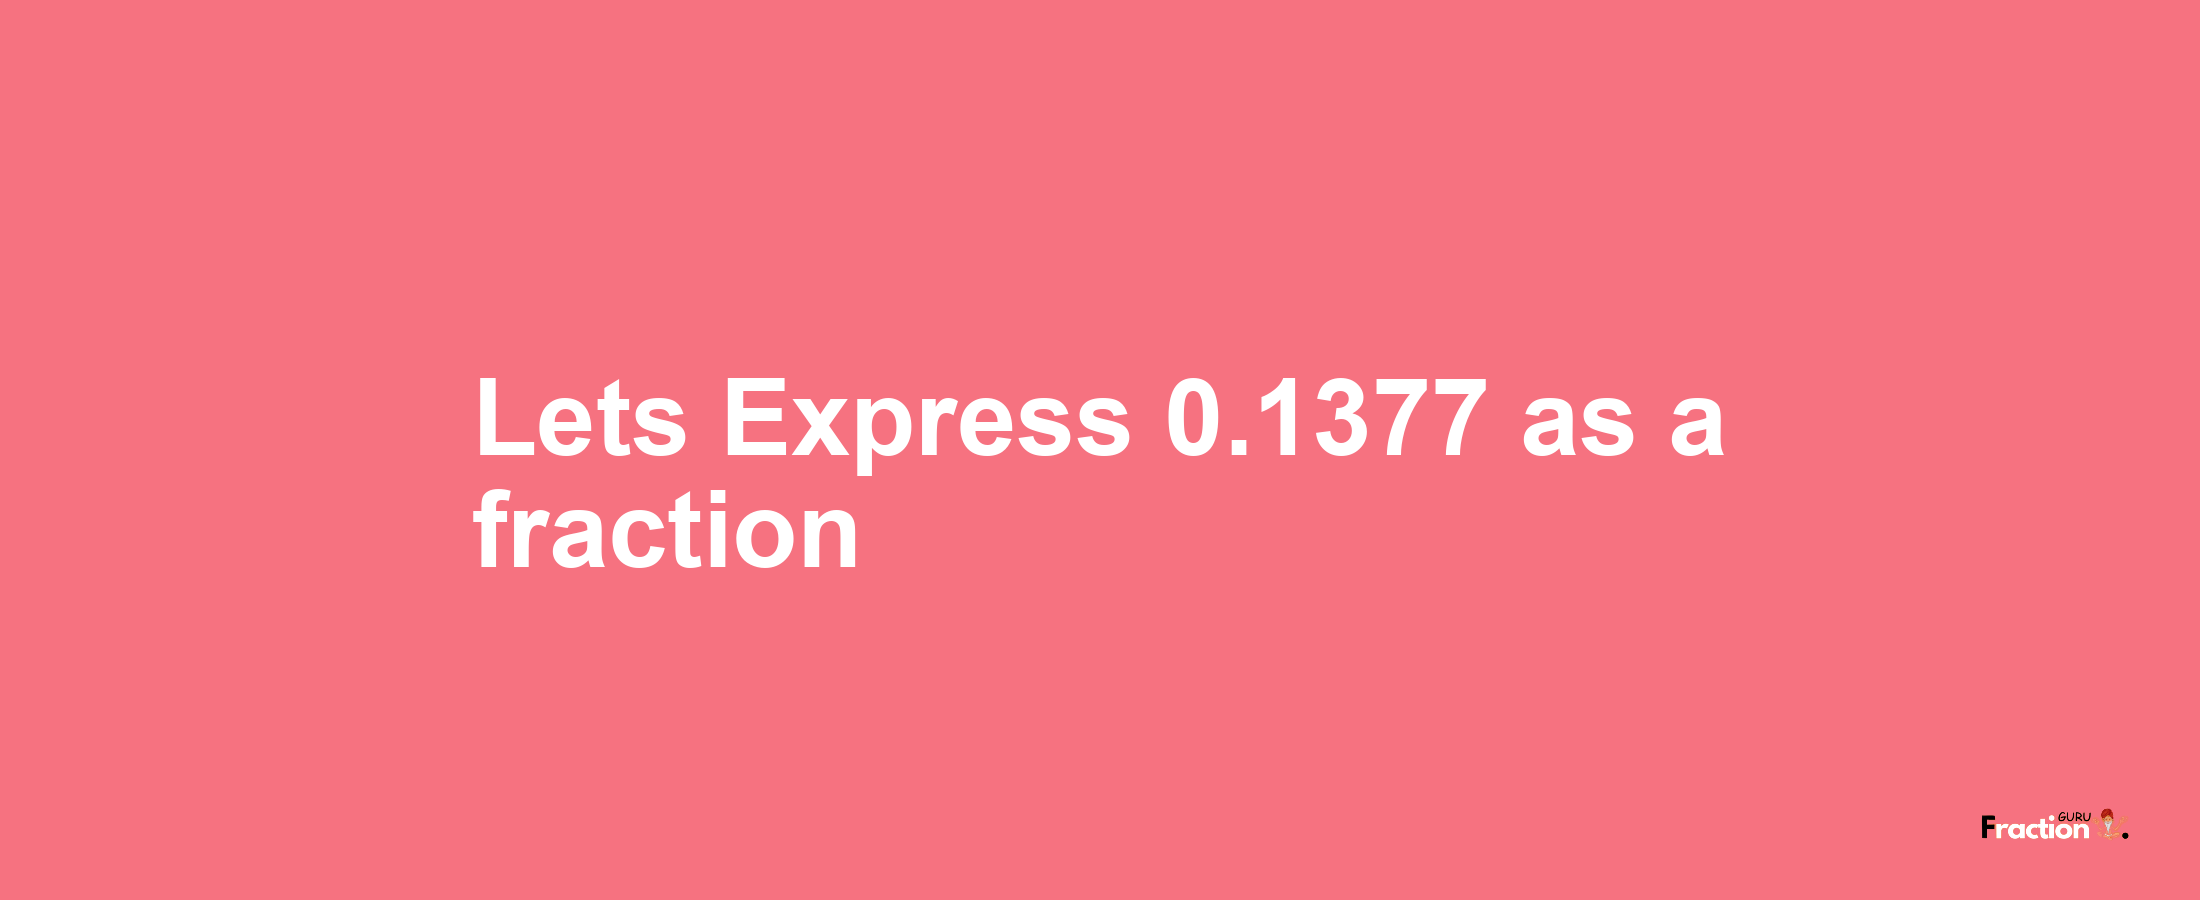 Lets Express 0.1377 as afraction